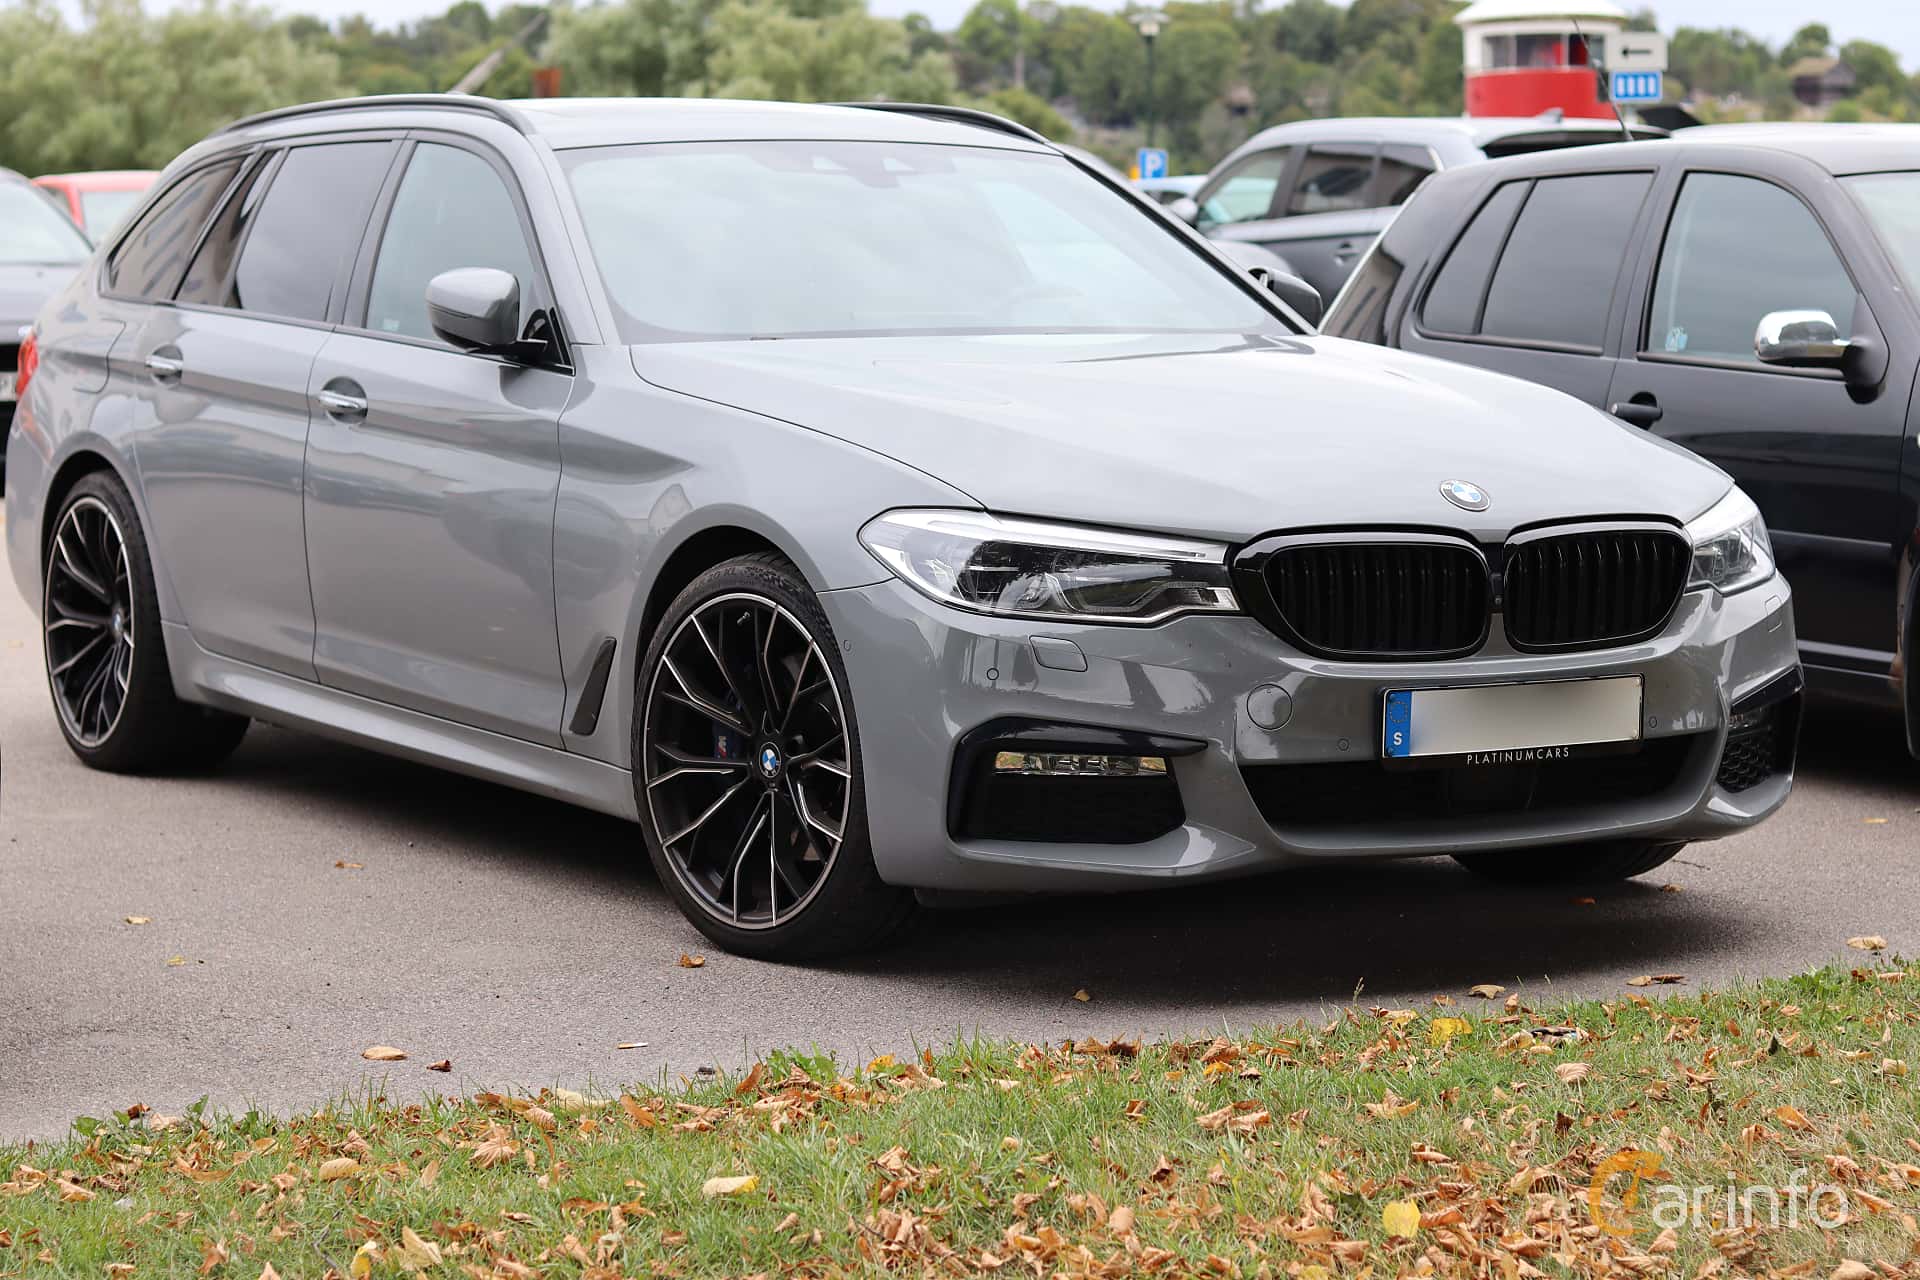 https://s.car.info/image_files/1920/bmw-5-series-touring-front-side-1-1215817.jpg